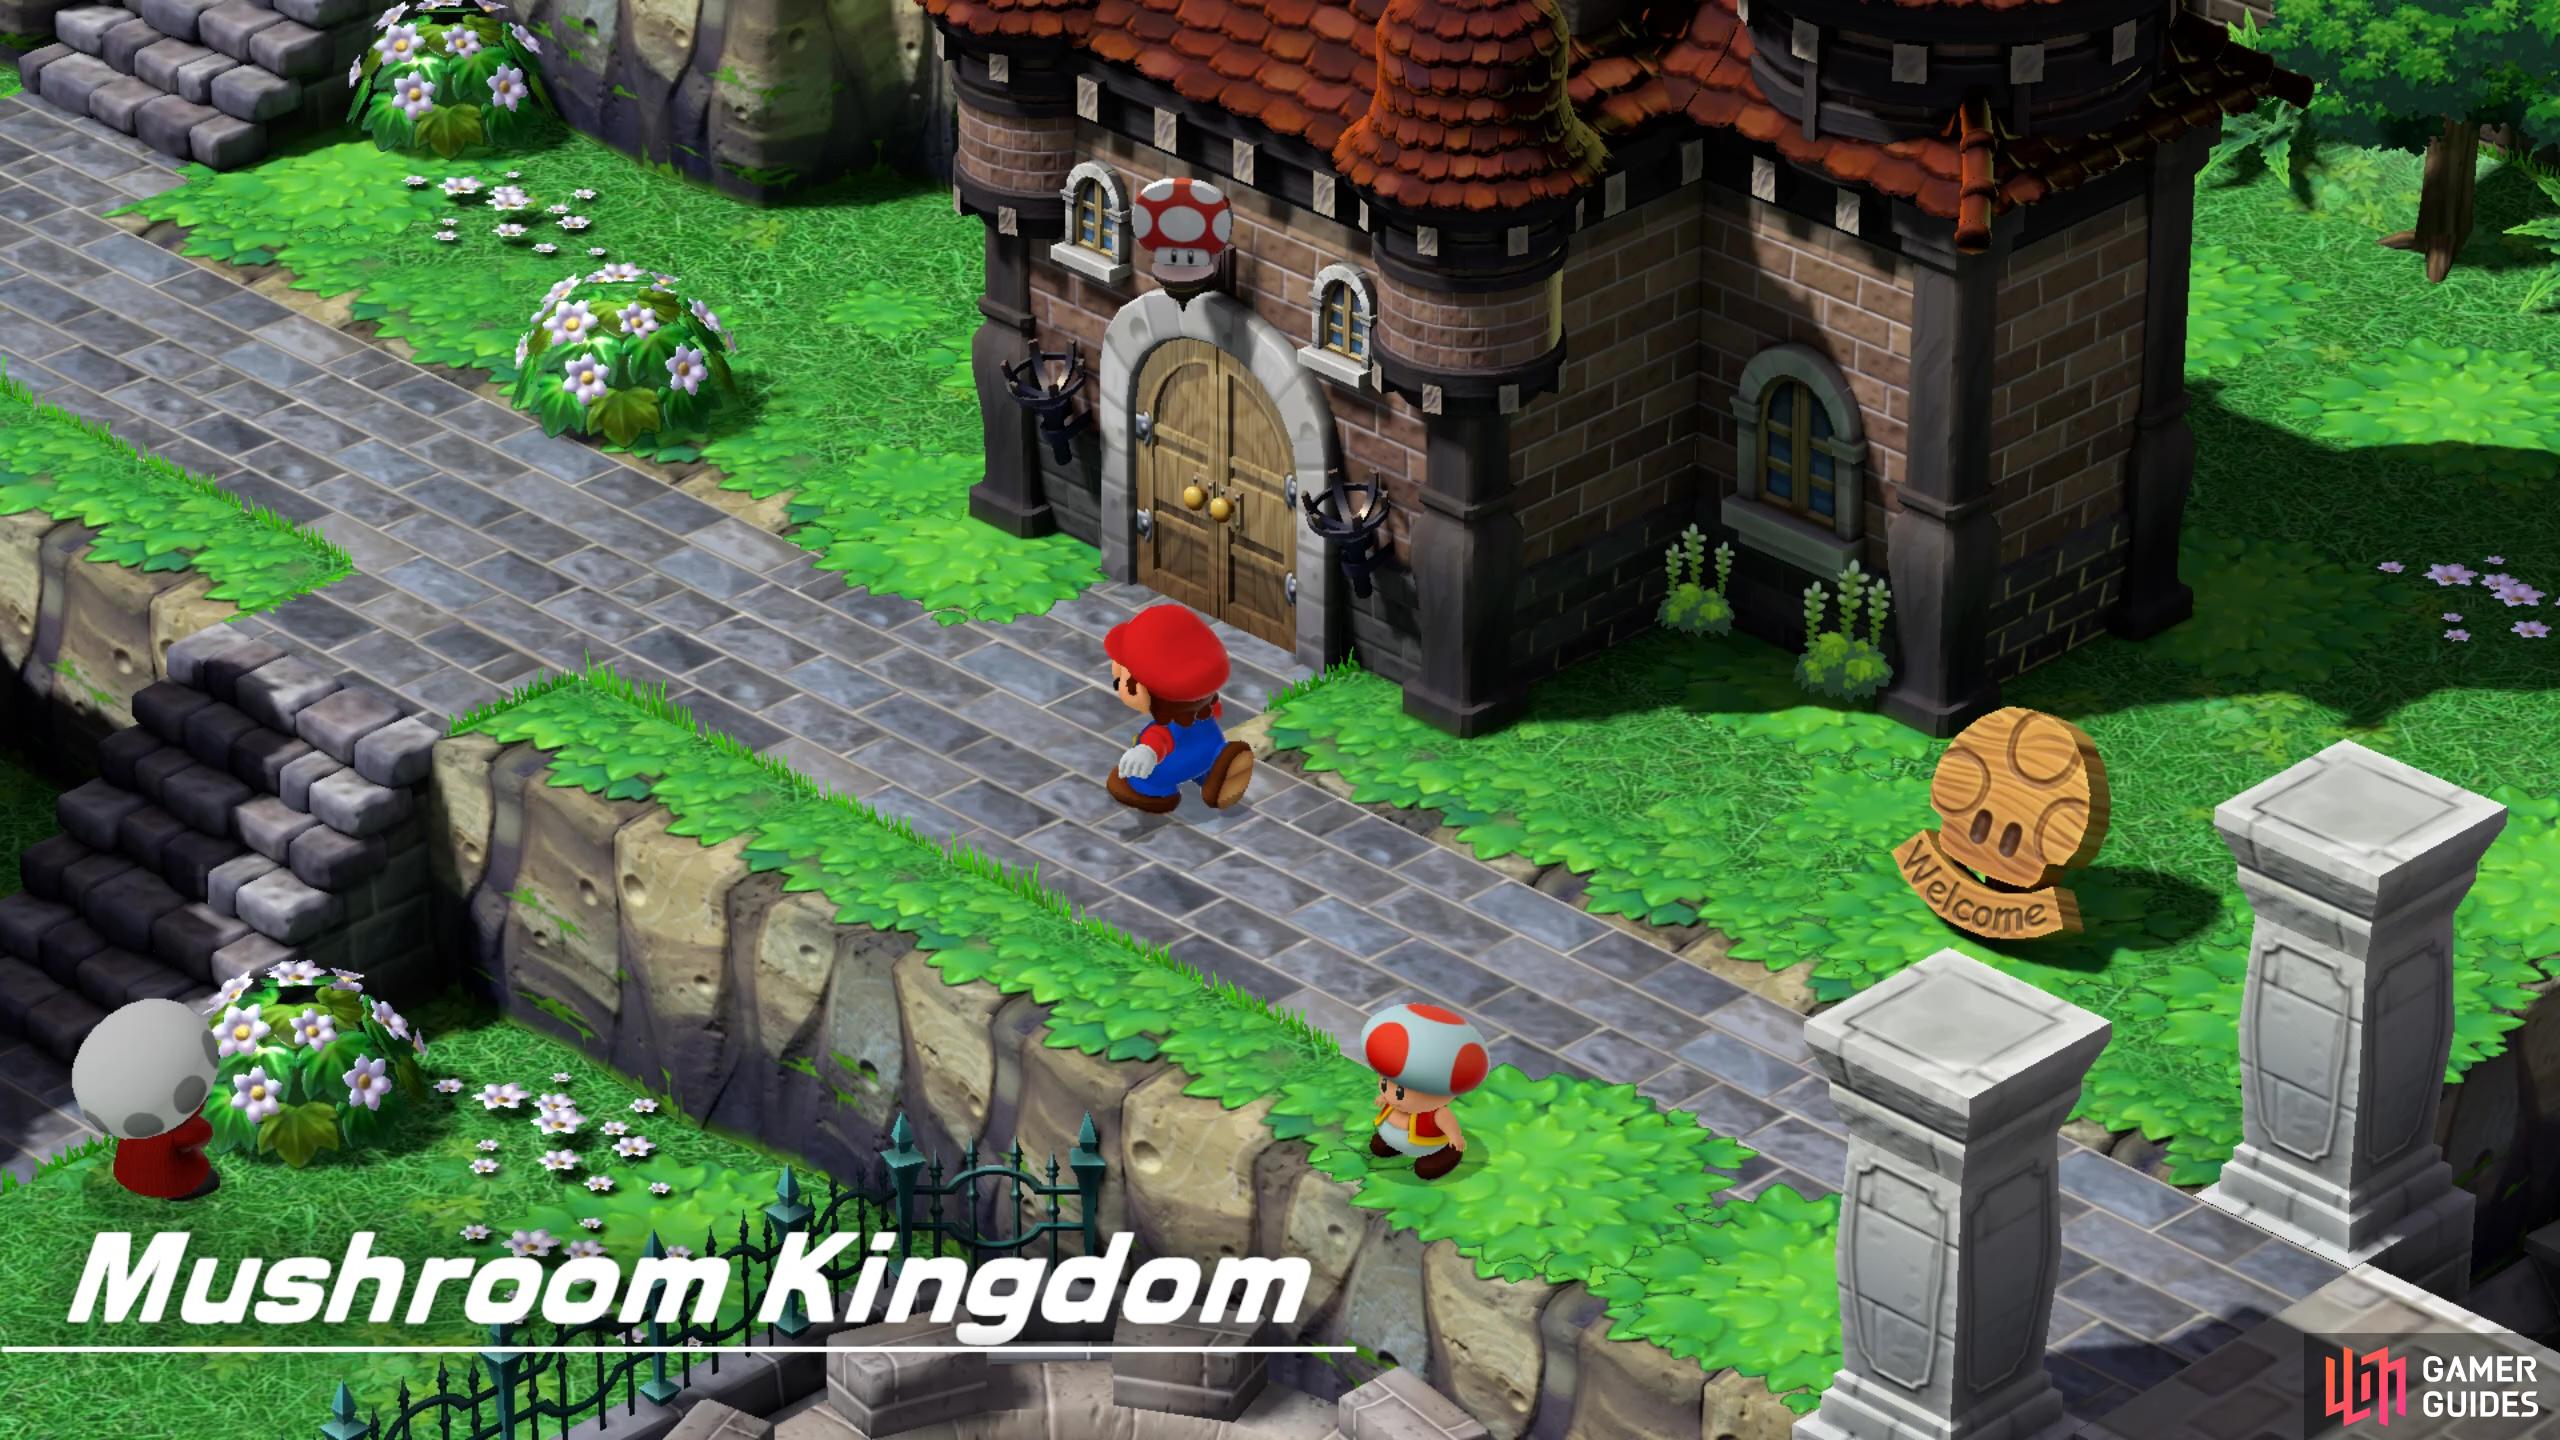 What is there to find in Mushroom Kingdom? Keep reading to find out!